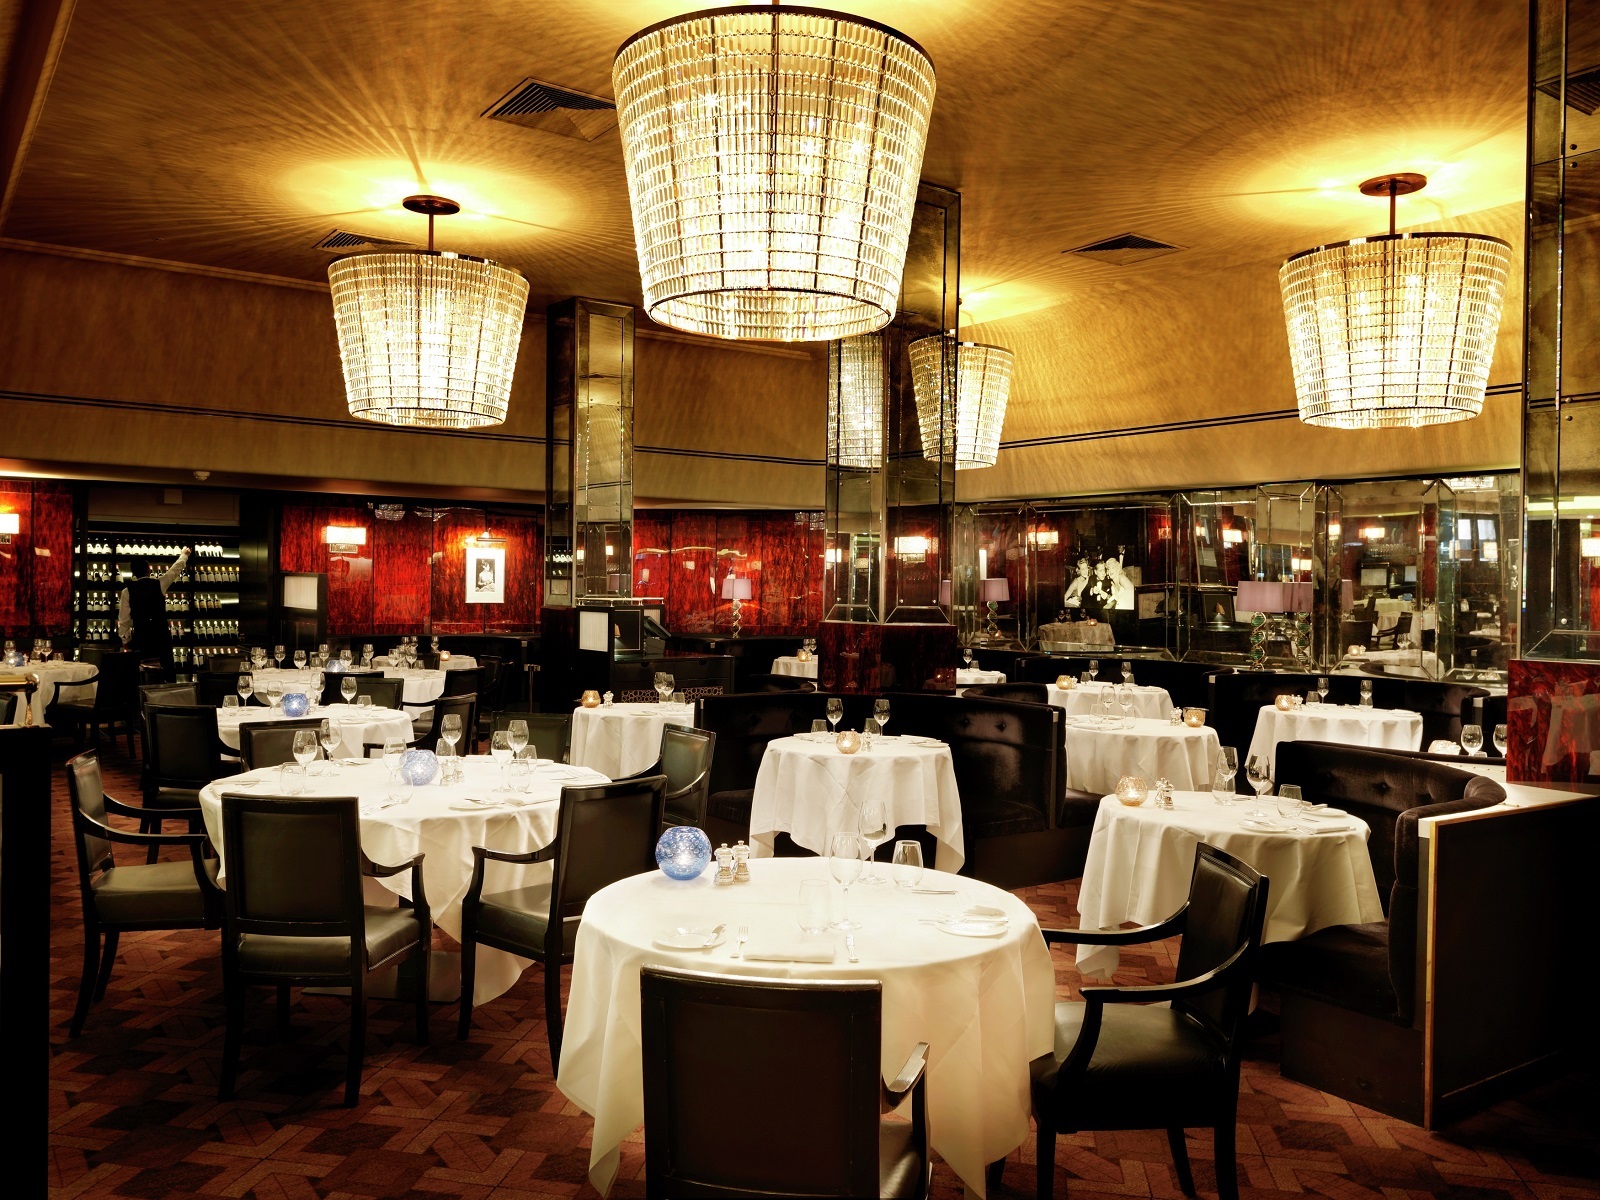 Interior at The Savoy Grill